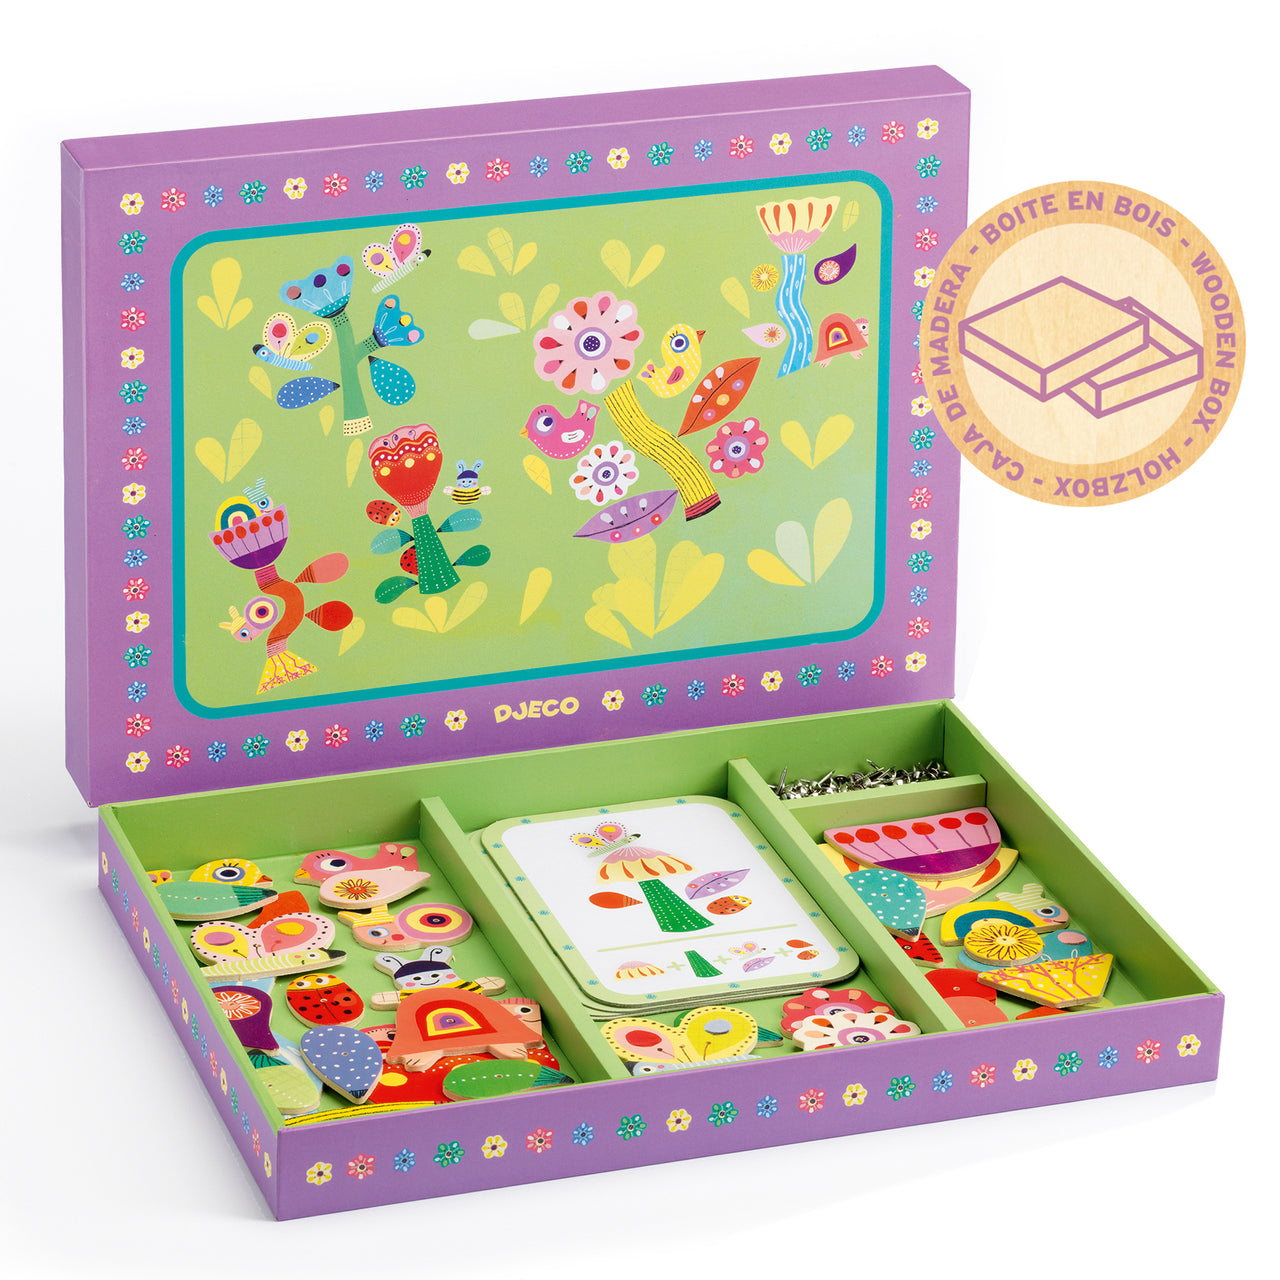 Tap tap Garden is a classic nursery activity updated by Djeco to develop little ones’ dexterity. Children can build their own flowers and gardens by attaching pieces to the cork board with the little hammer and nails. They can either recreate the designs provided or use their imagination to create a beautiful garden! Everything comes in a lovely wooden box!